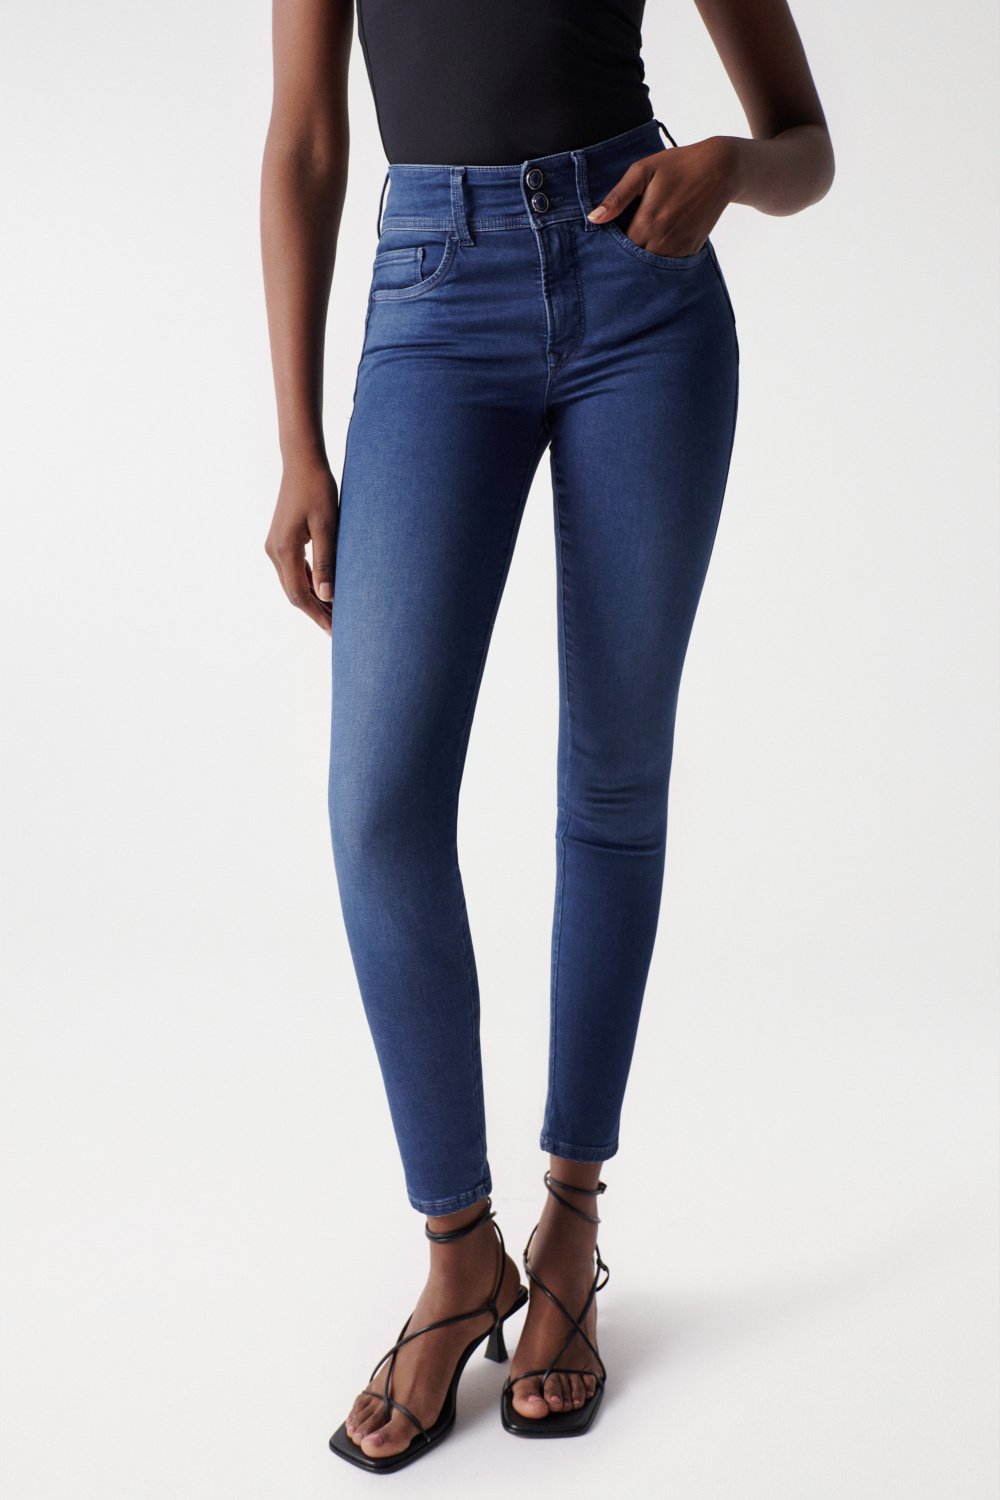 PUSH IN SECRET-JEANS, SOFT TOUCH, SKINNY - Salsa